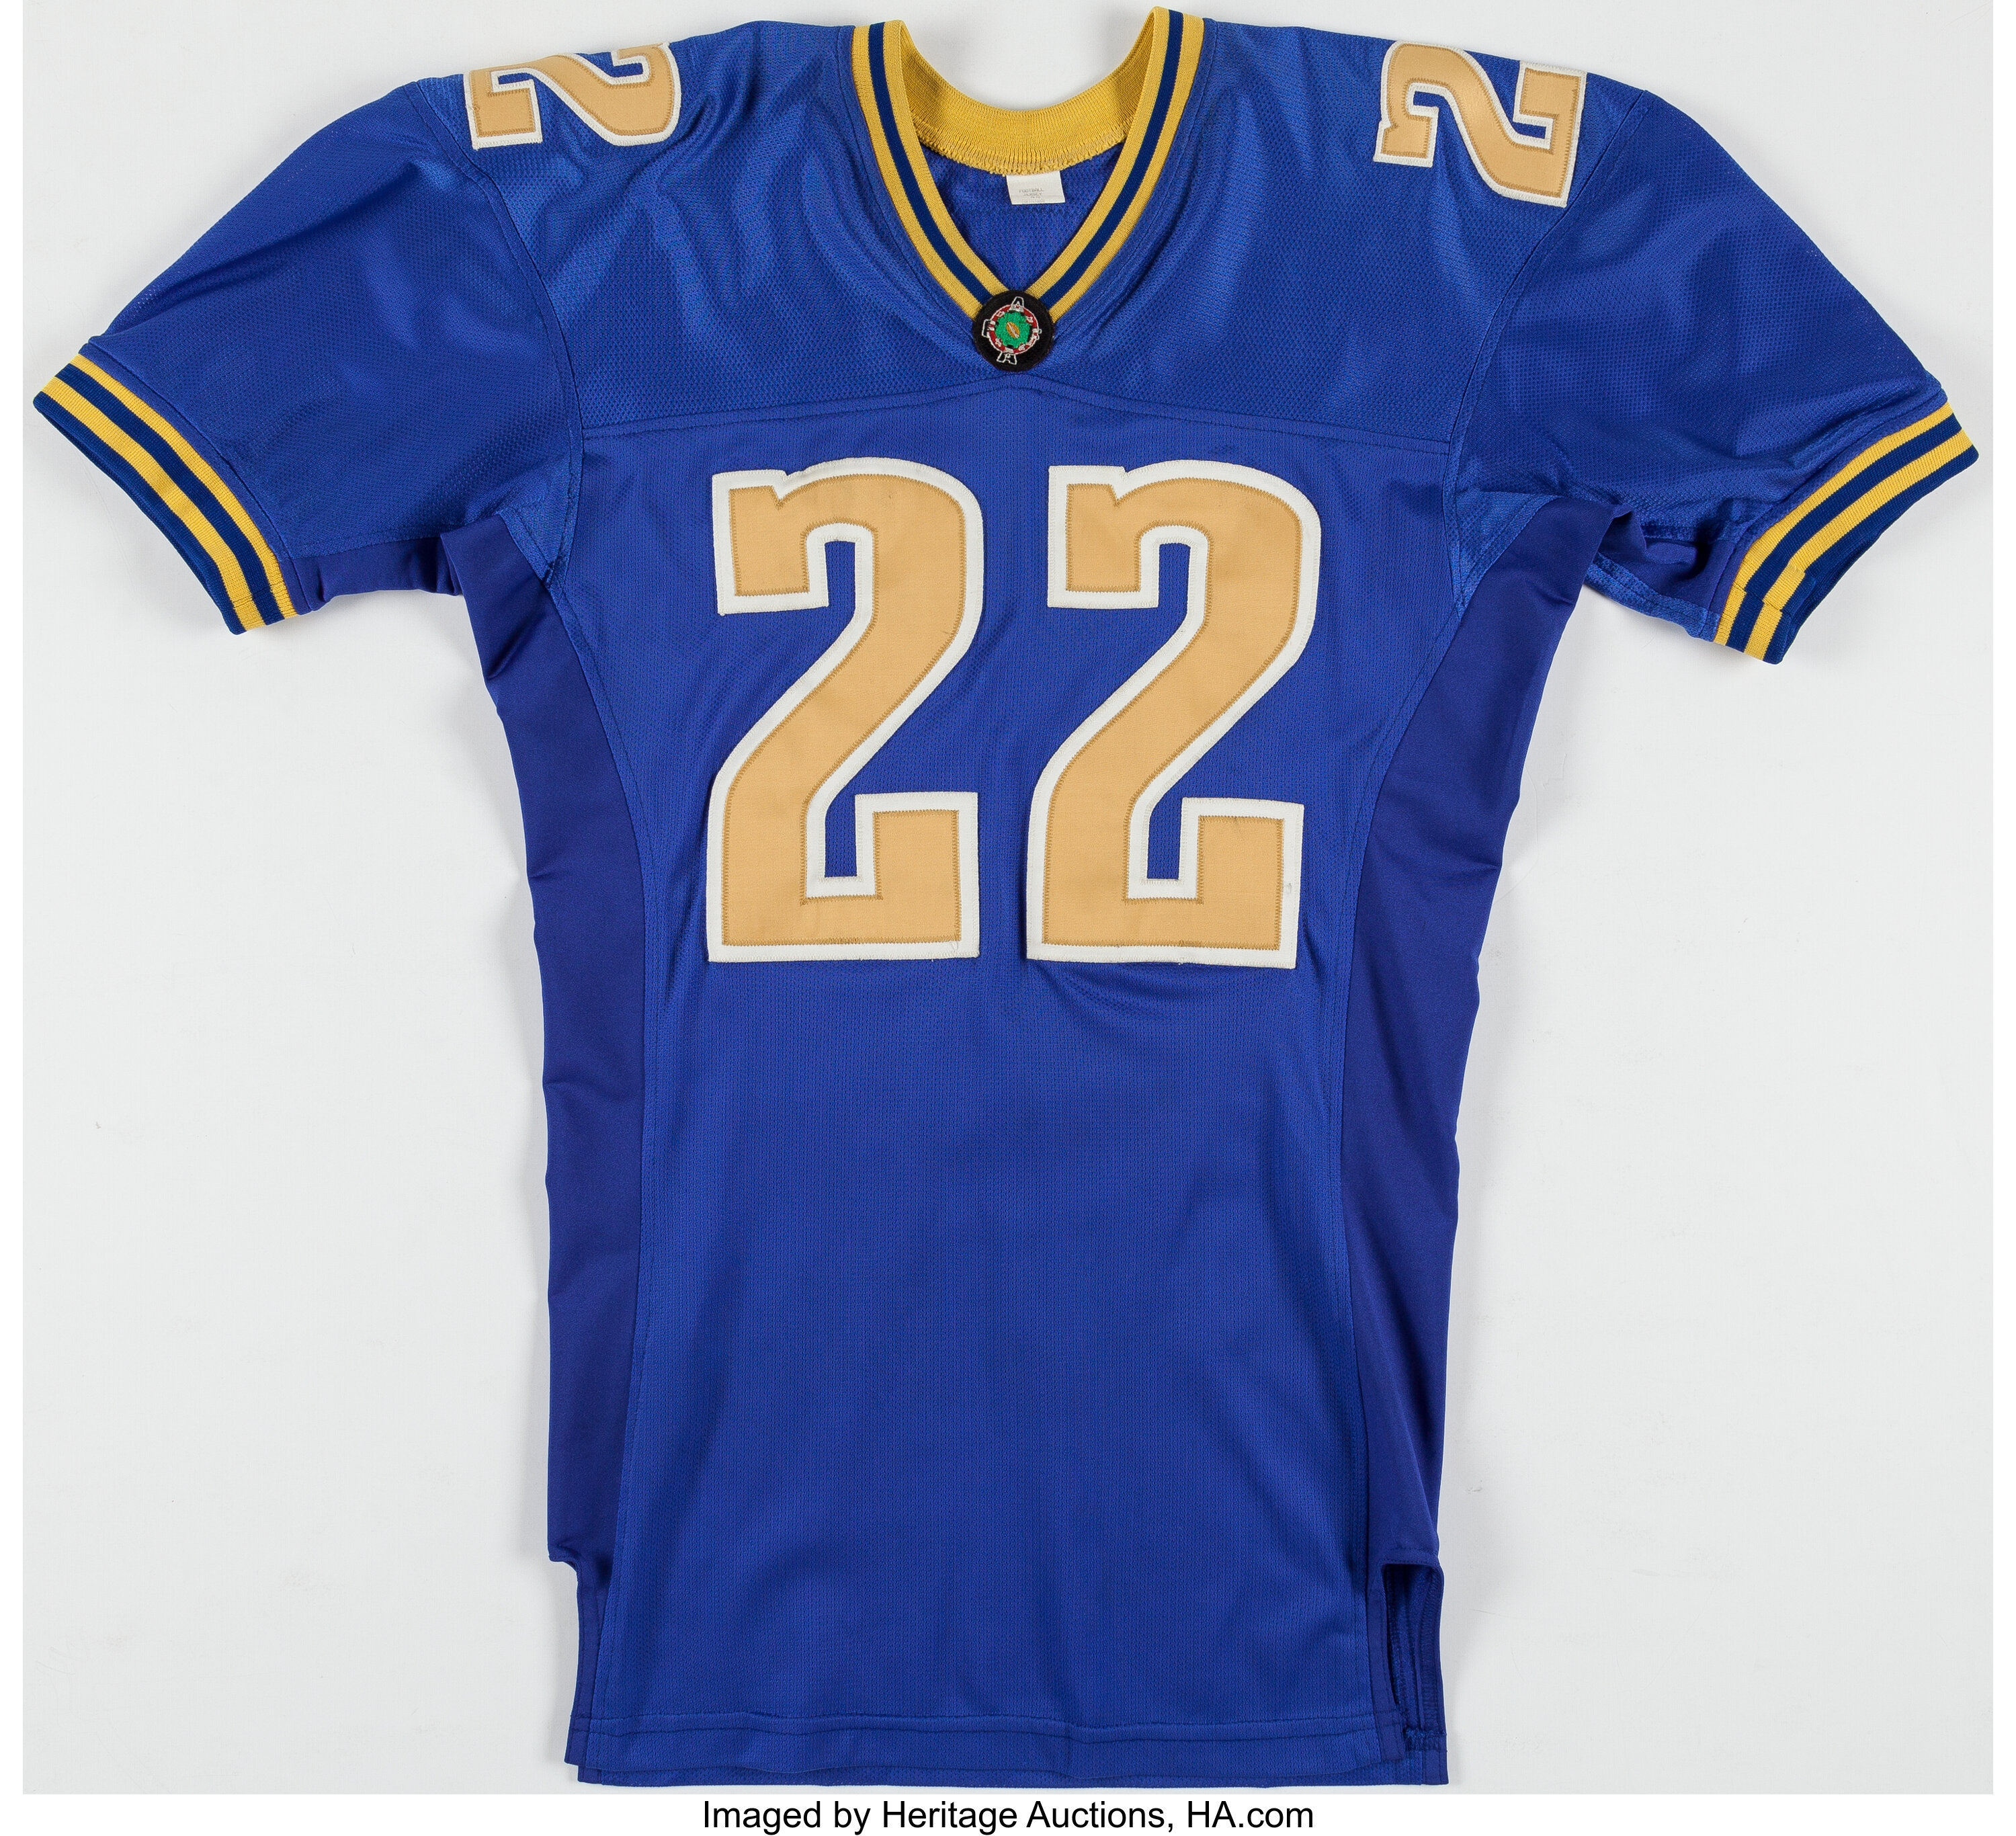 You can take home an opening weekend game-used gold jersey - True Blue LA